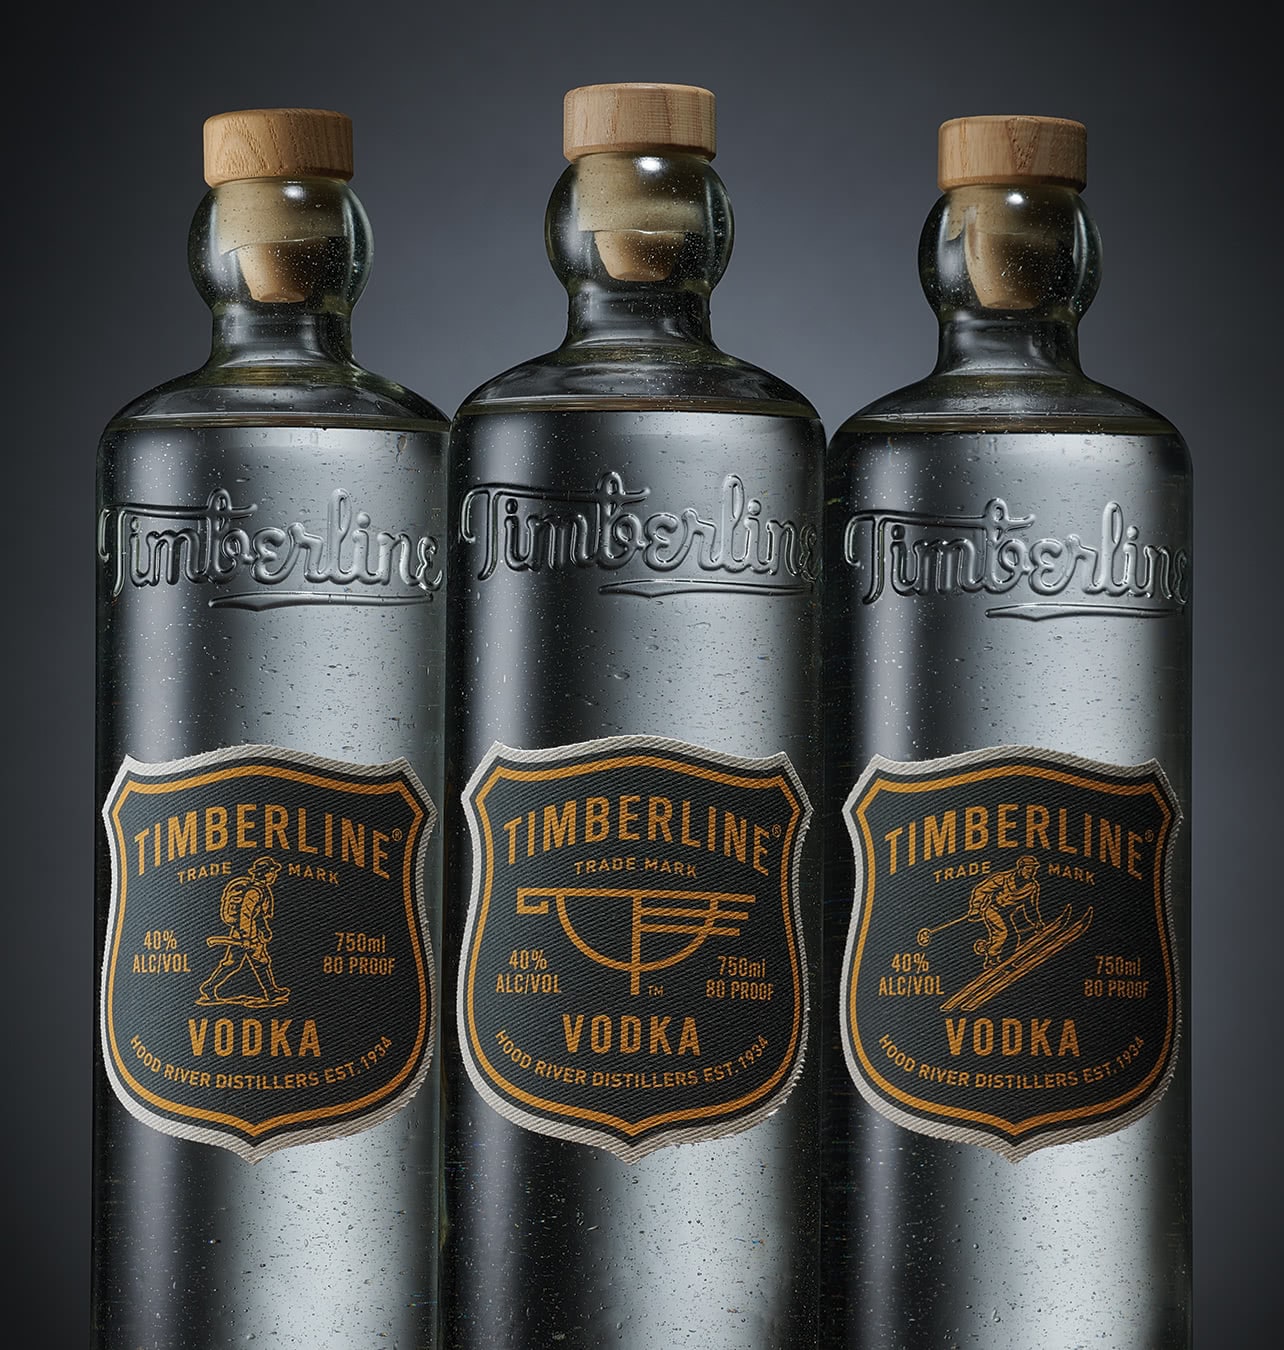 Timberline Vodka group of bottles with three differrent canvas label designs